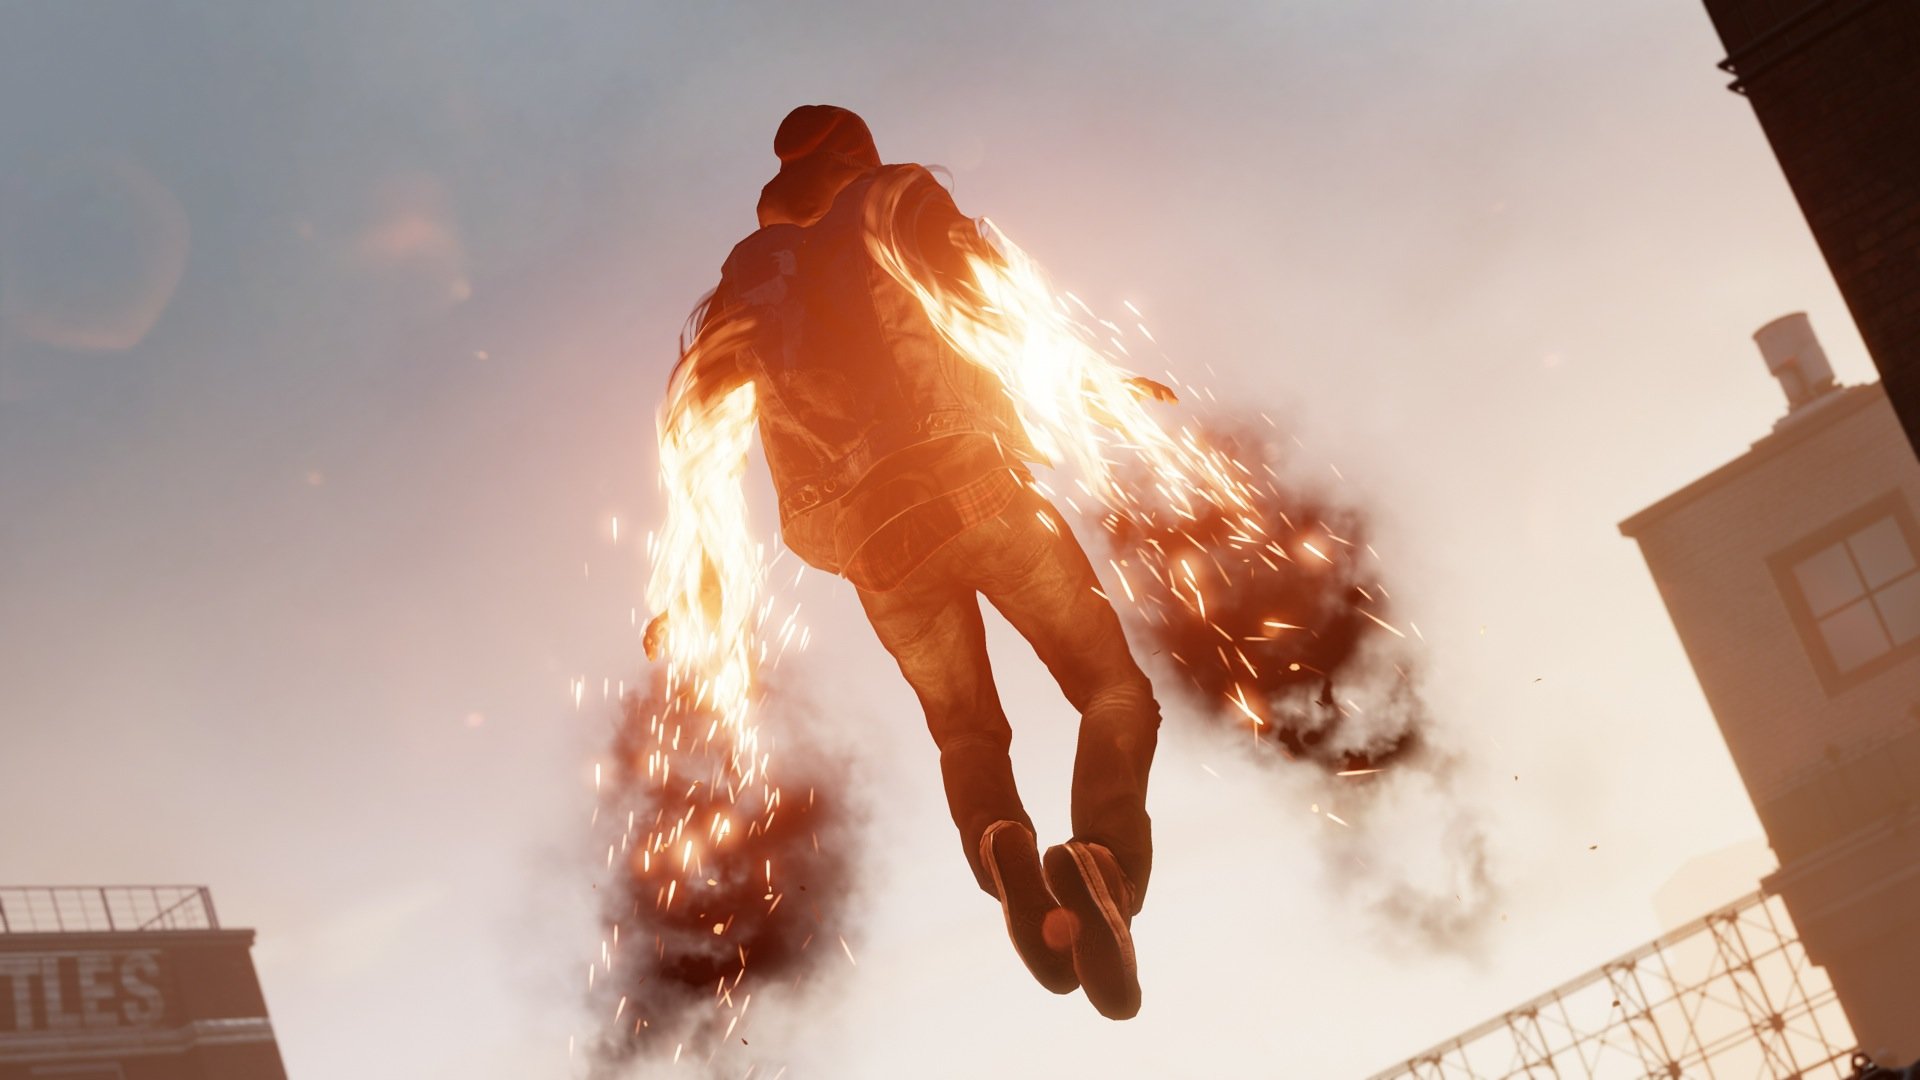 Second Son Wallpaper Id - Infamous Second Son Smoke Powers - HD Wallpaper 